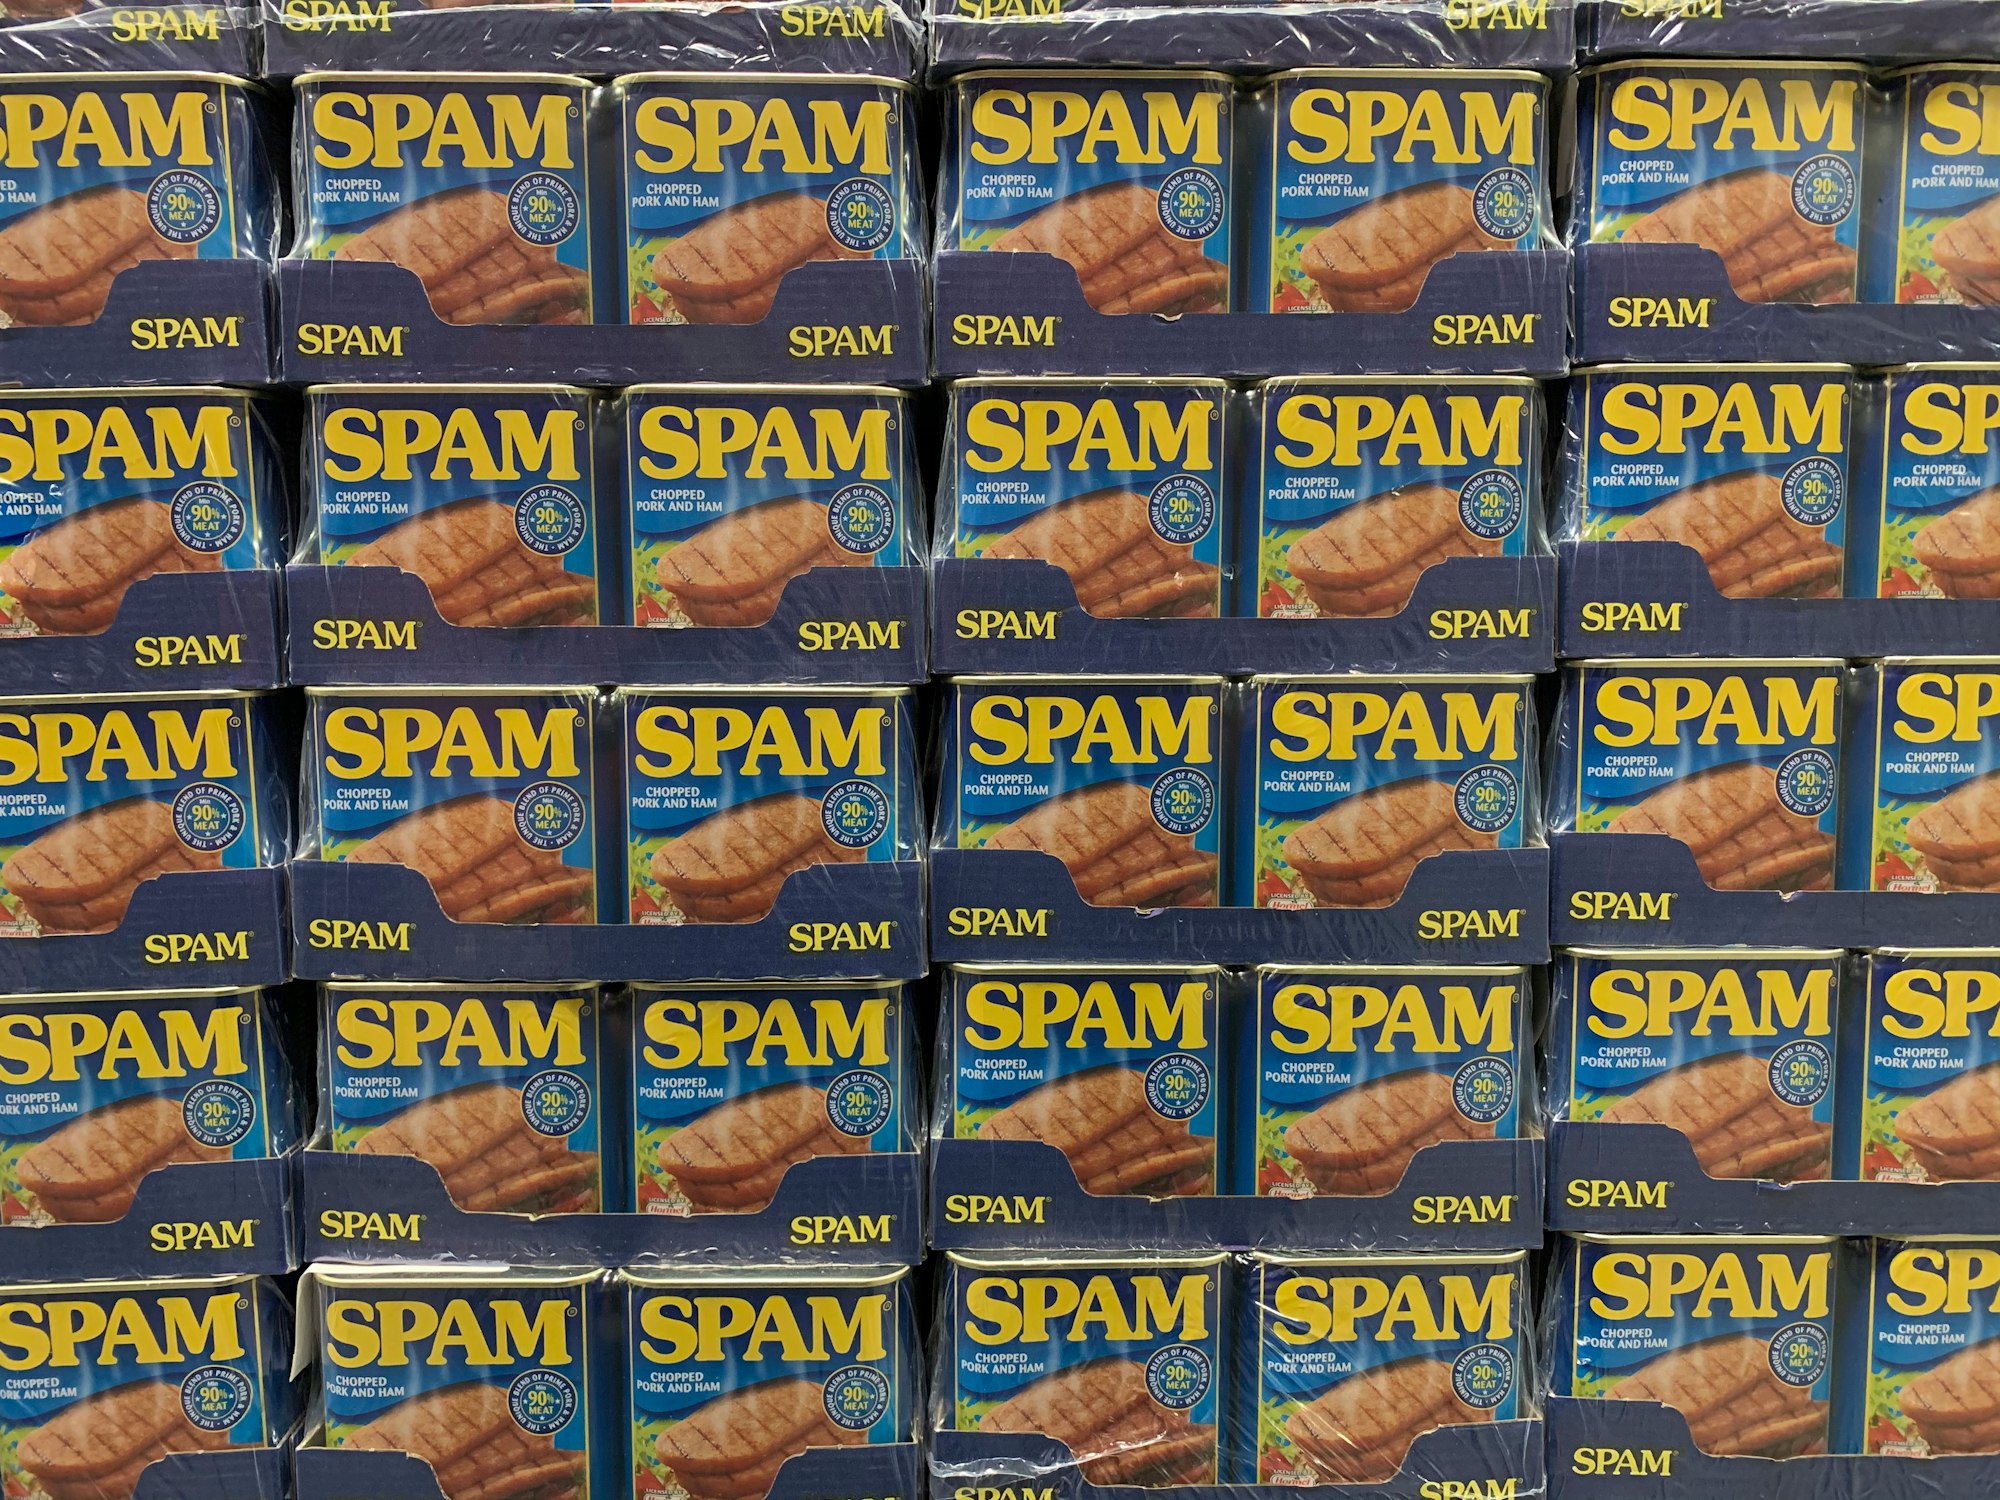 How burner emails protect you against spam